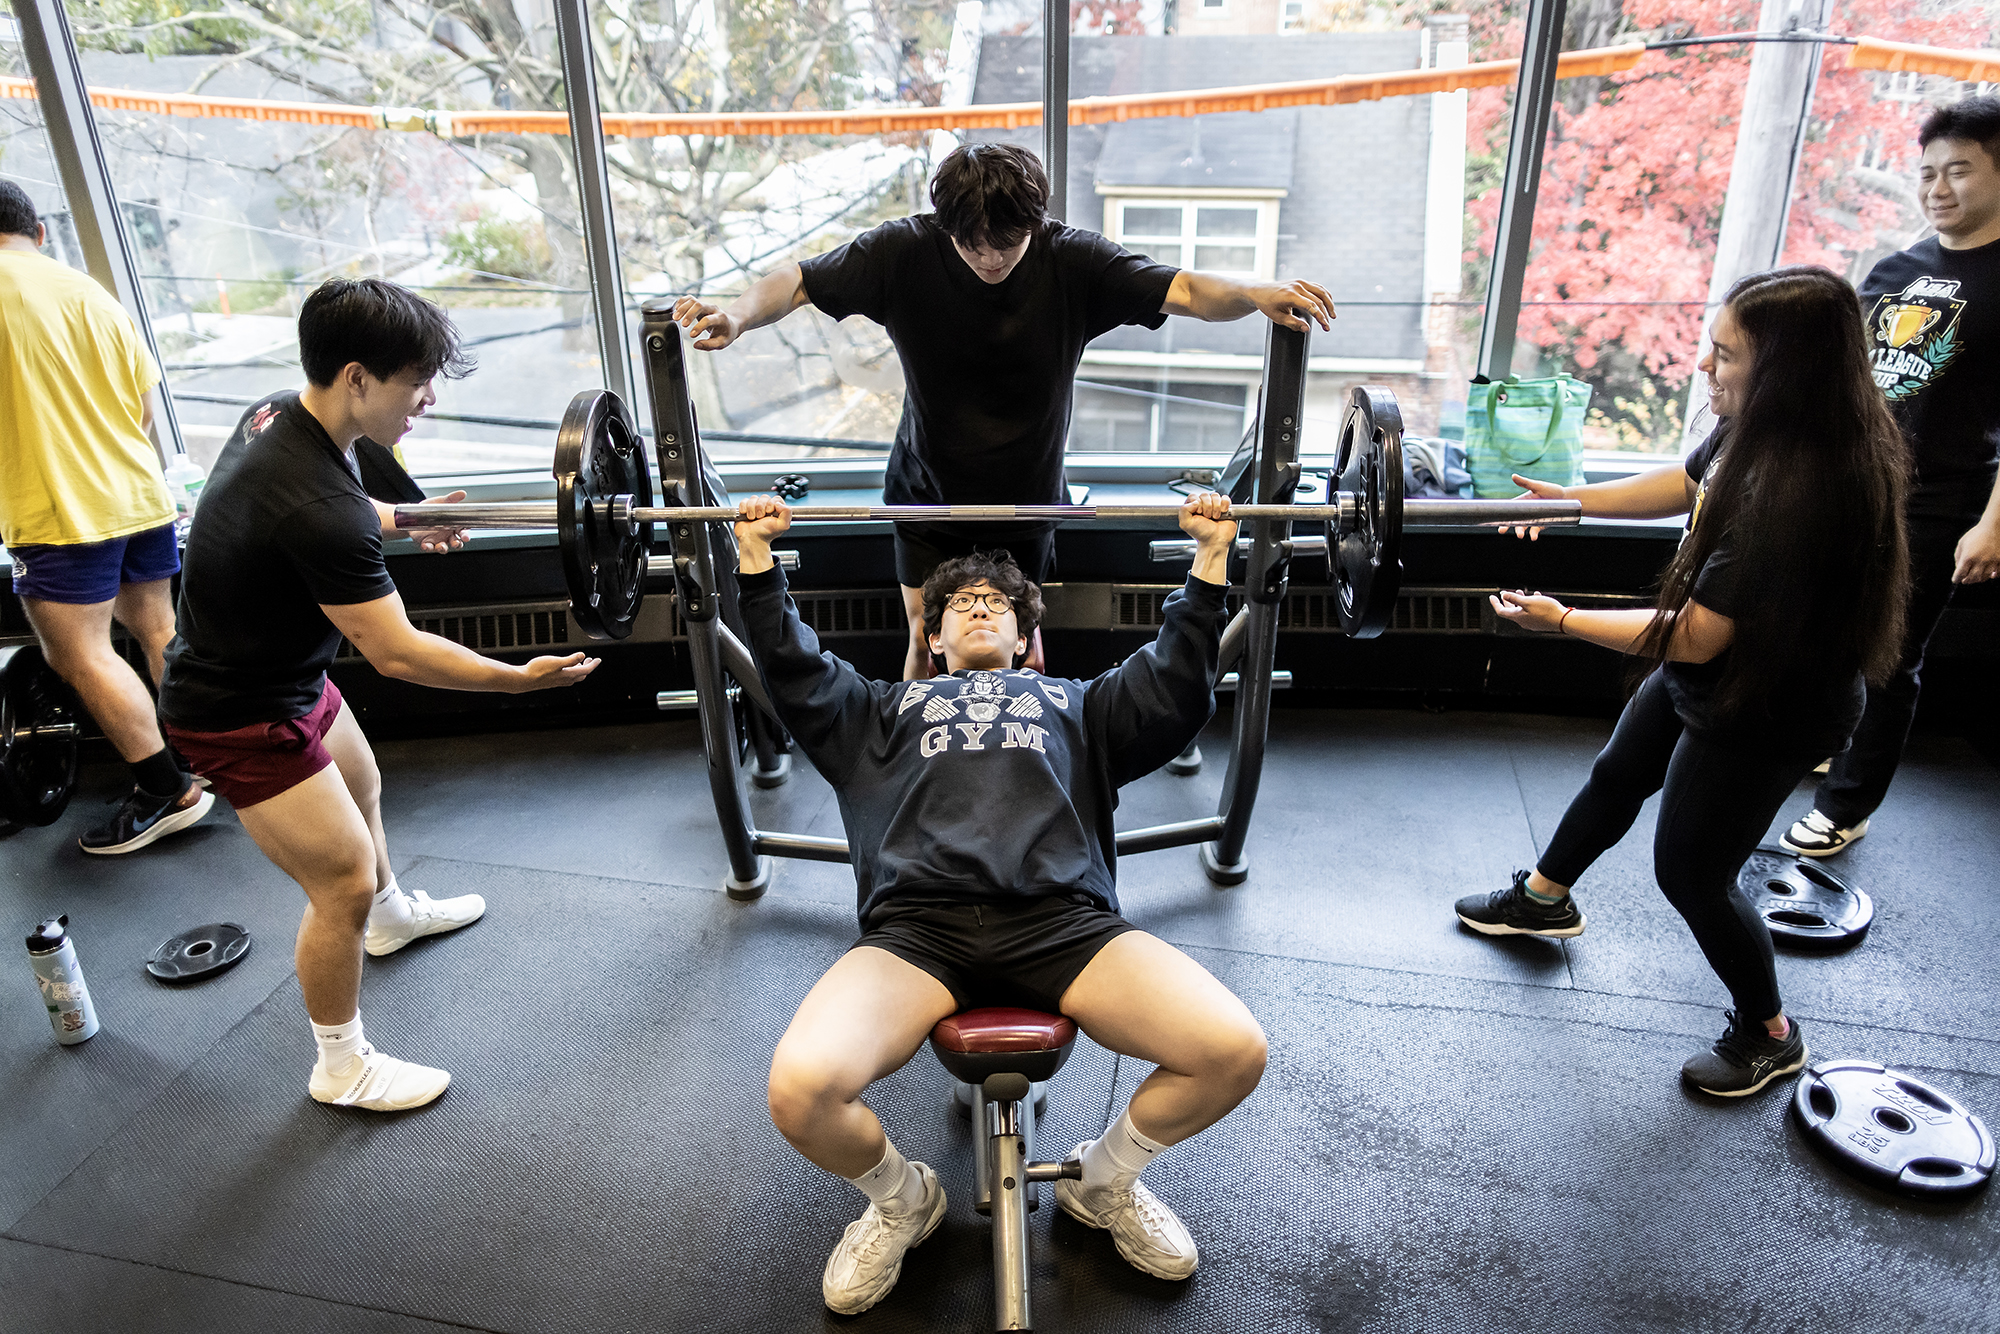 Bryan Yan, a fourth-year finance major in the Wharton School, performs an incline barbell bench press while spotted by Adrienna Davis and two other students.